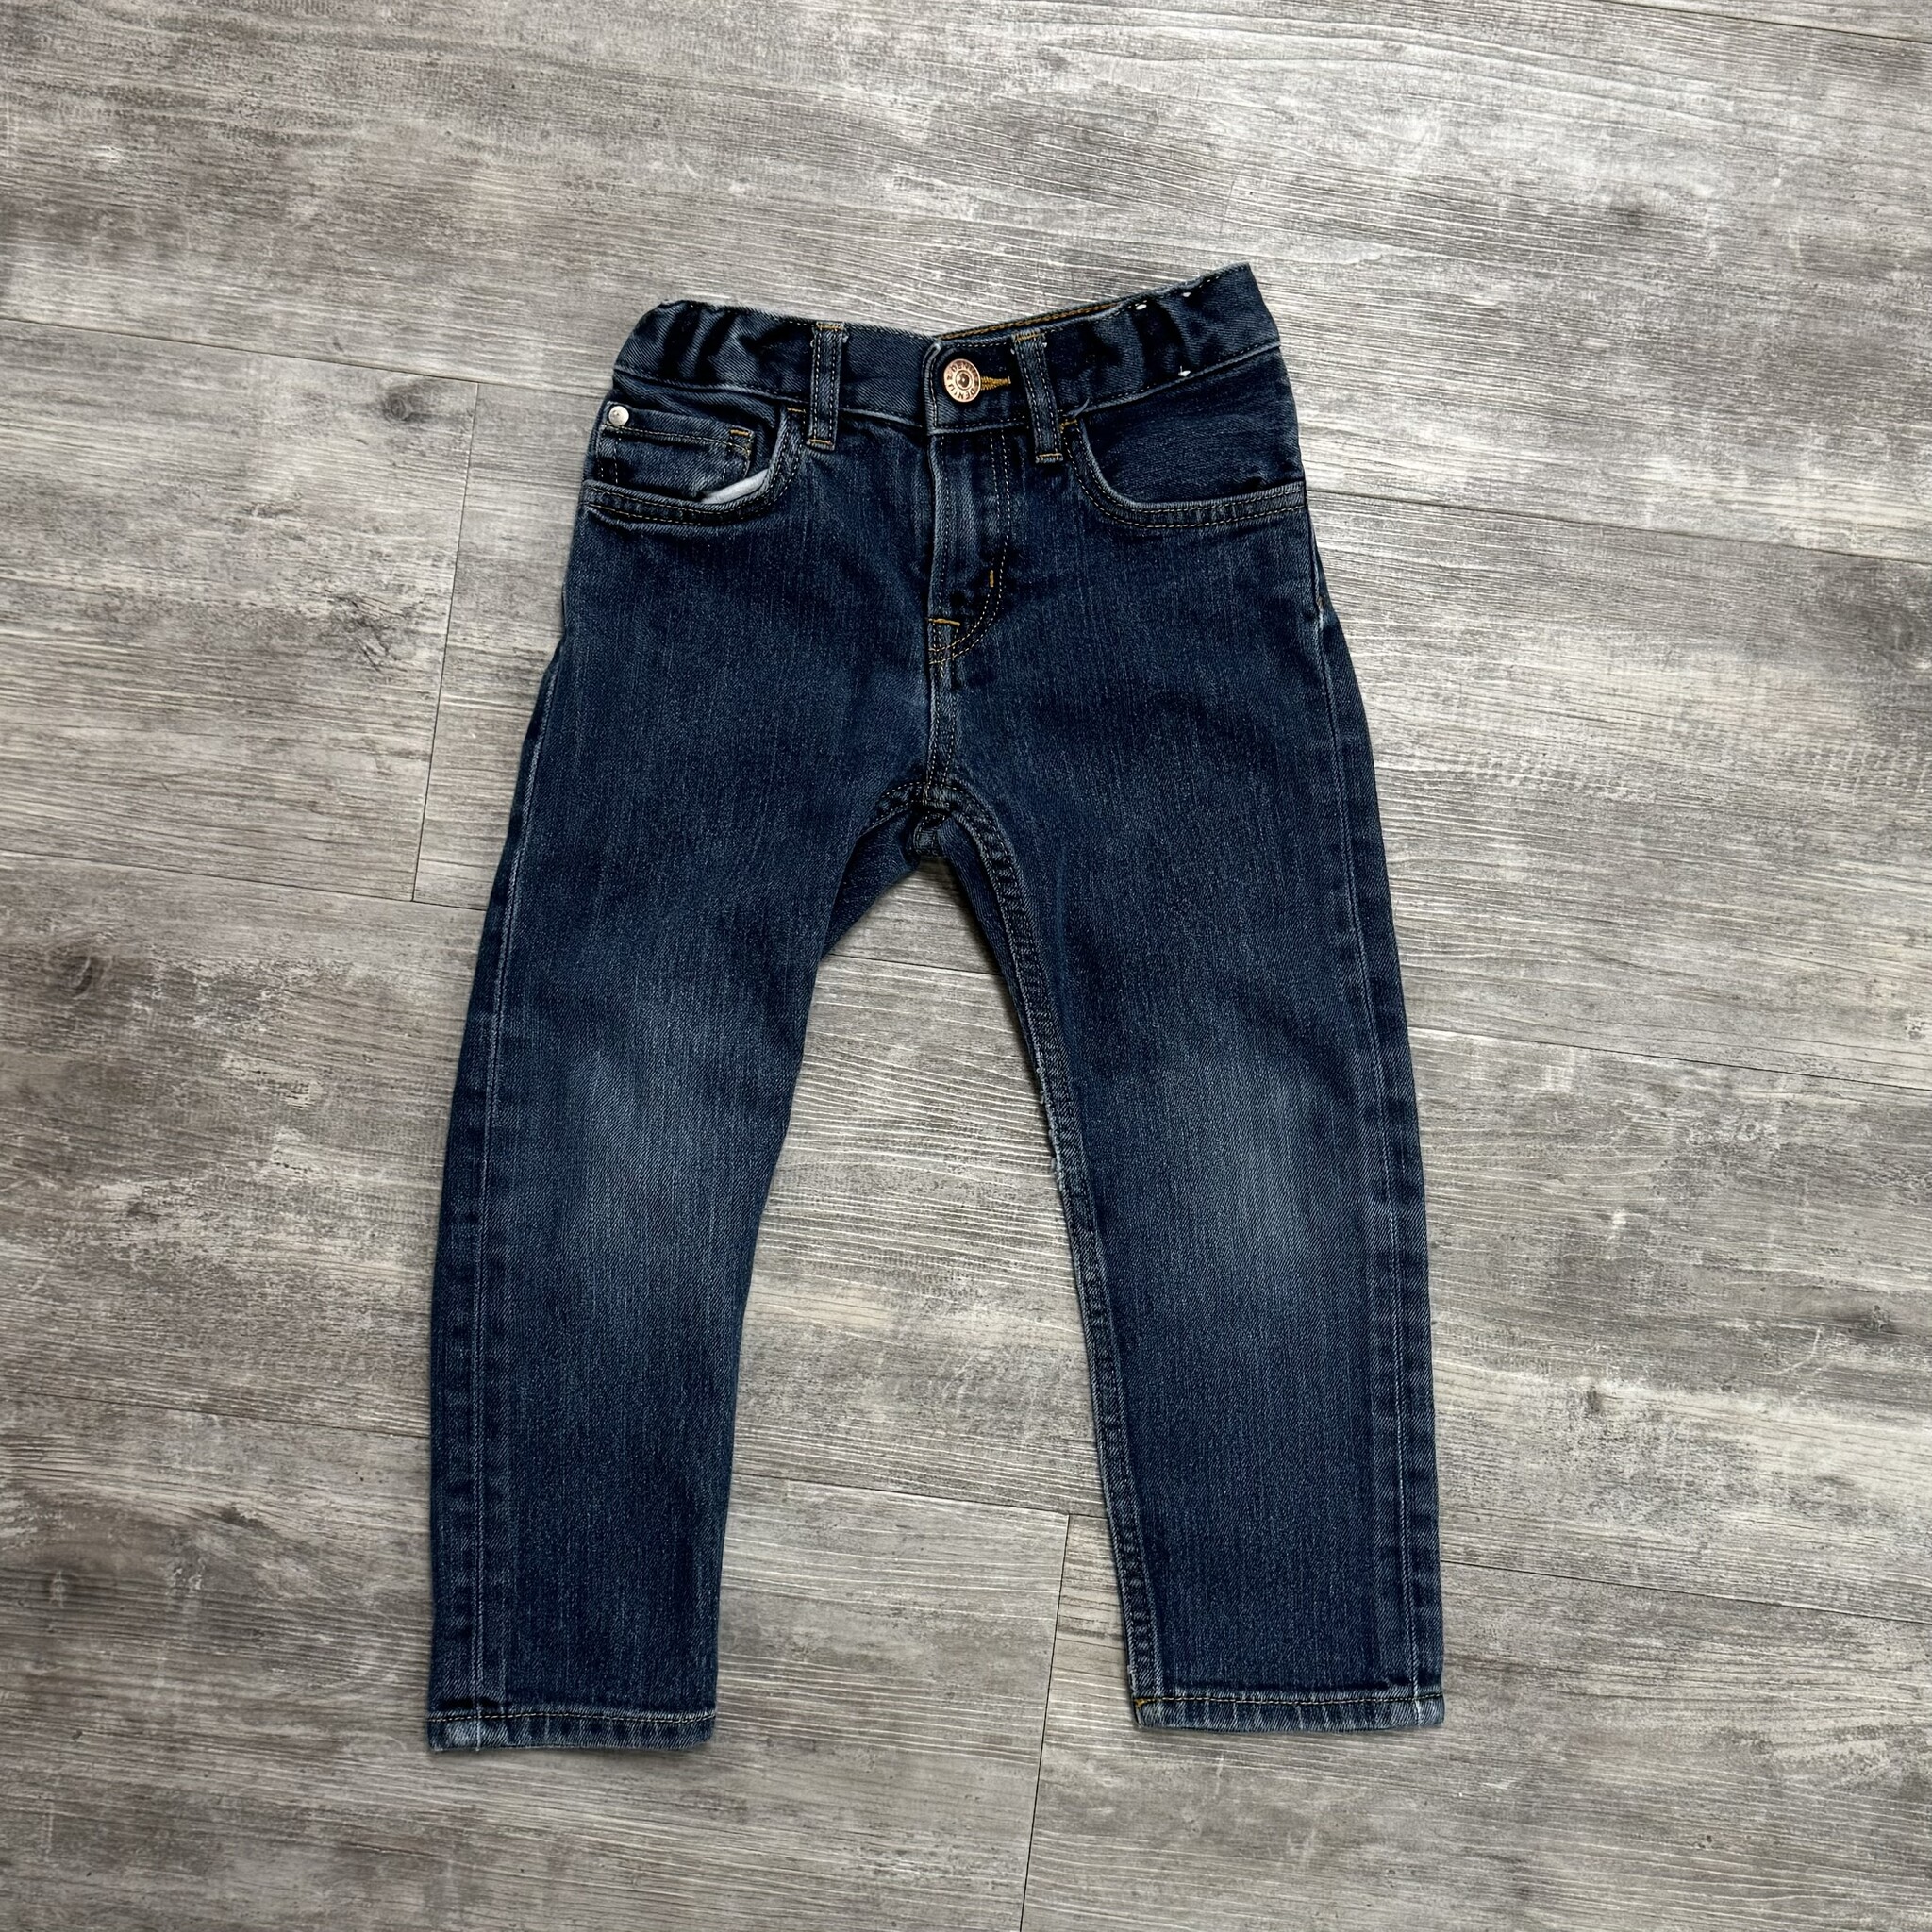 Stone Wash Jeans - Size 104